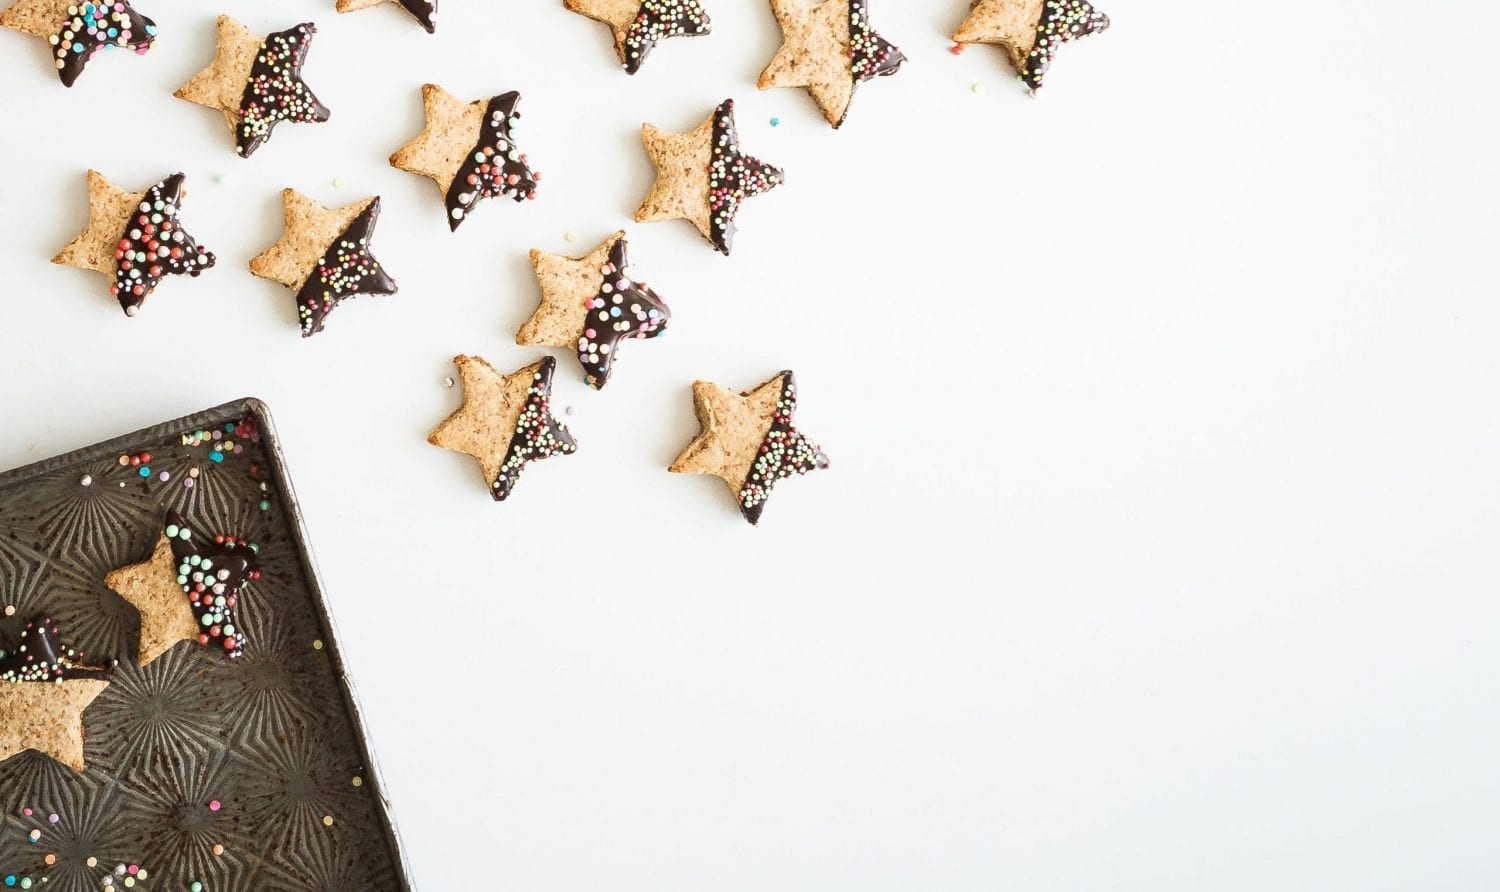 star shaped cookies, half covered in chocolate and sprinkles. alligned artistically with some on baking tray and some on a white table